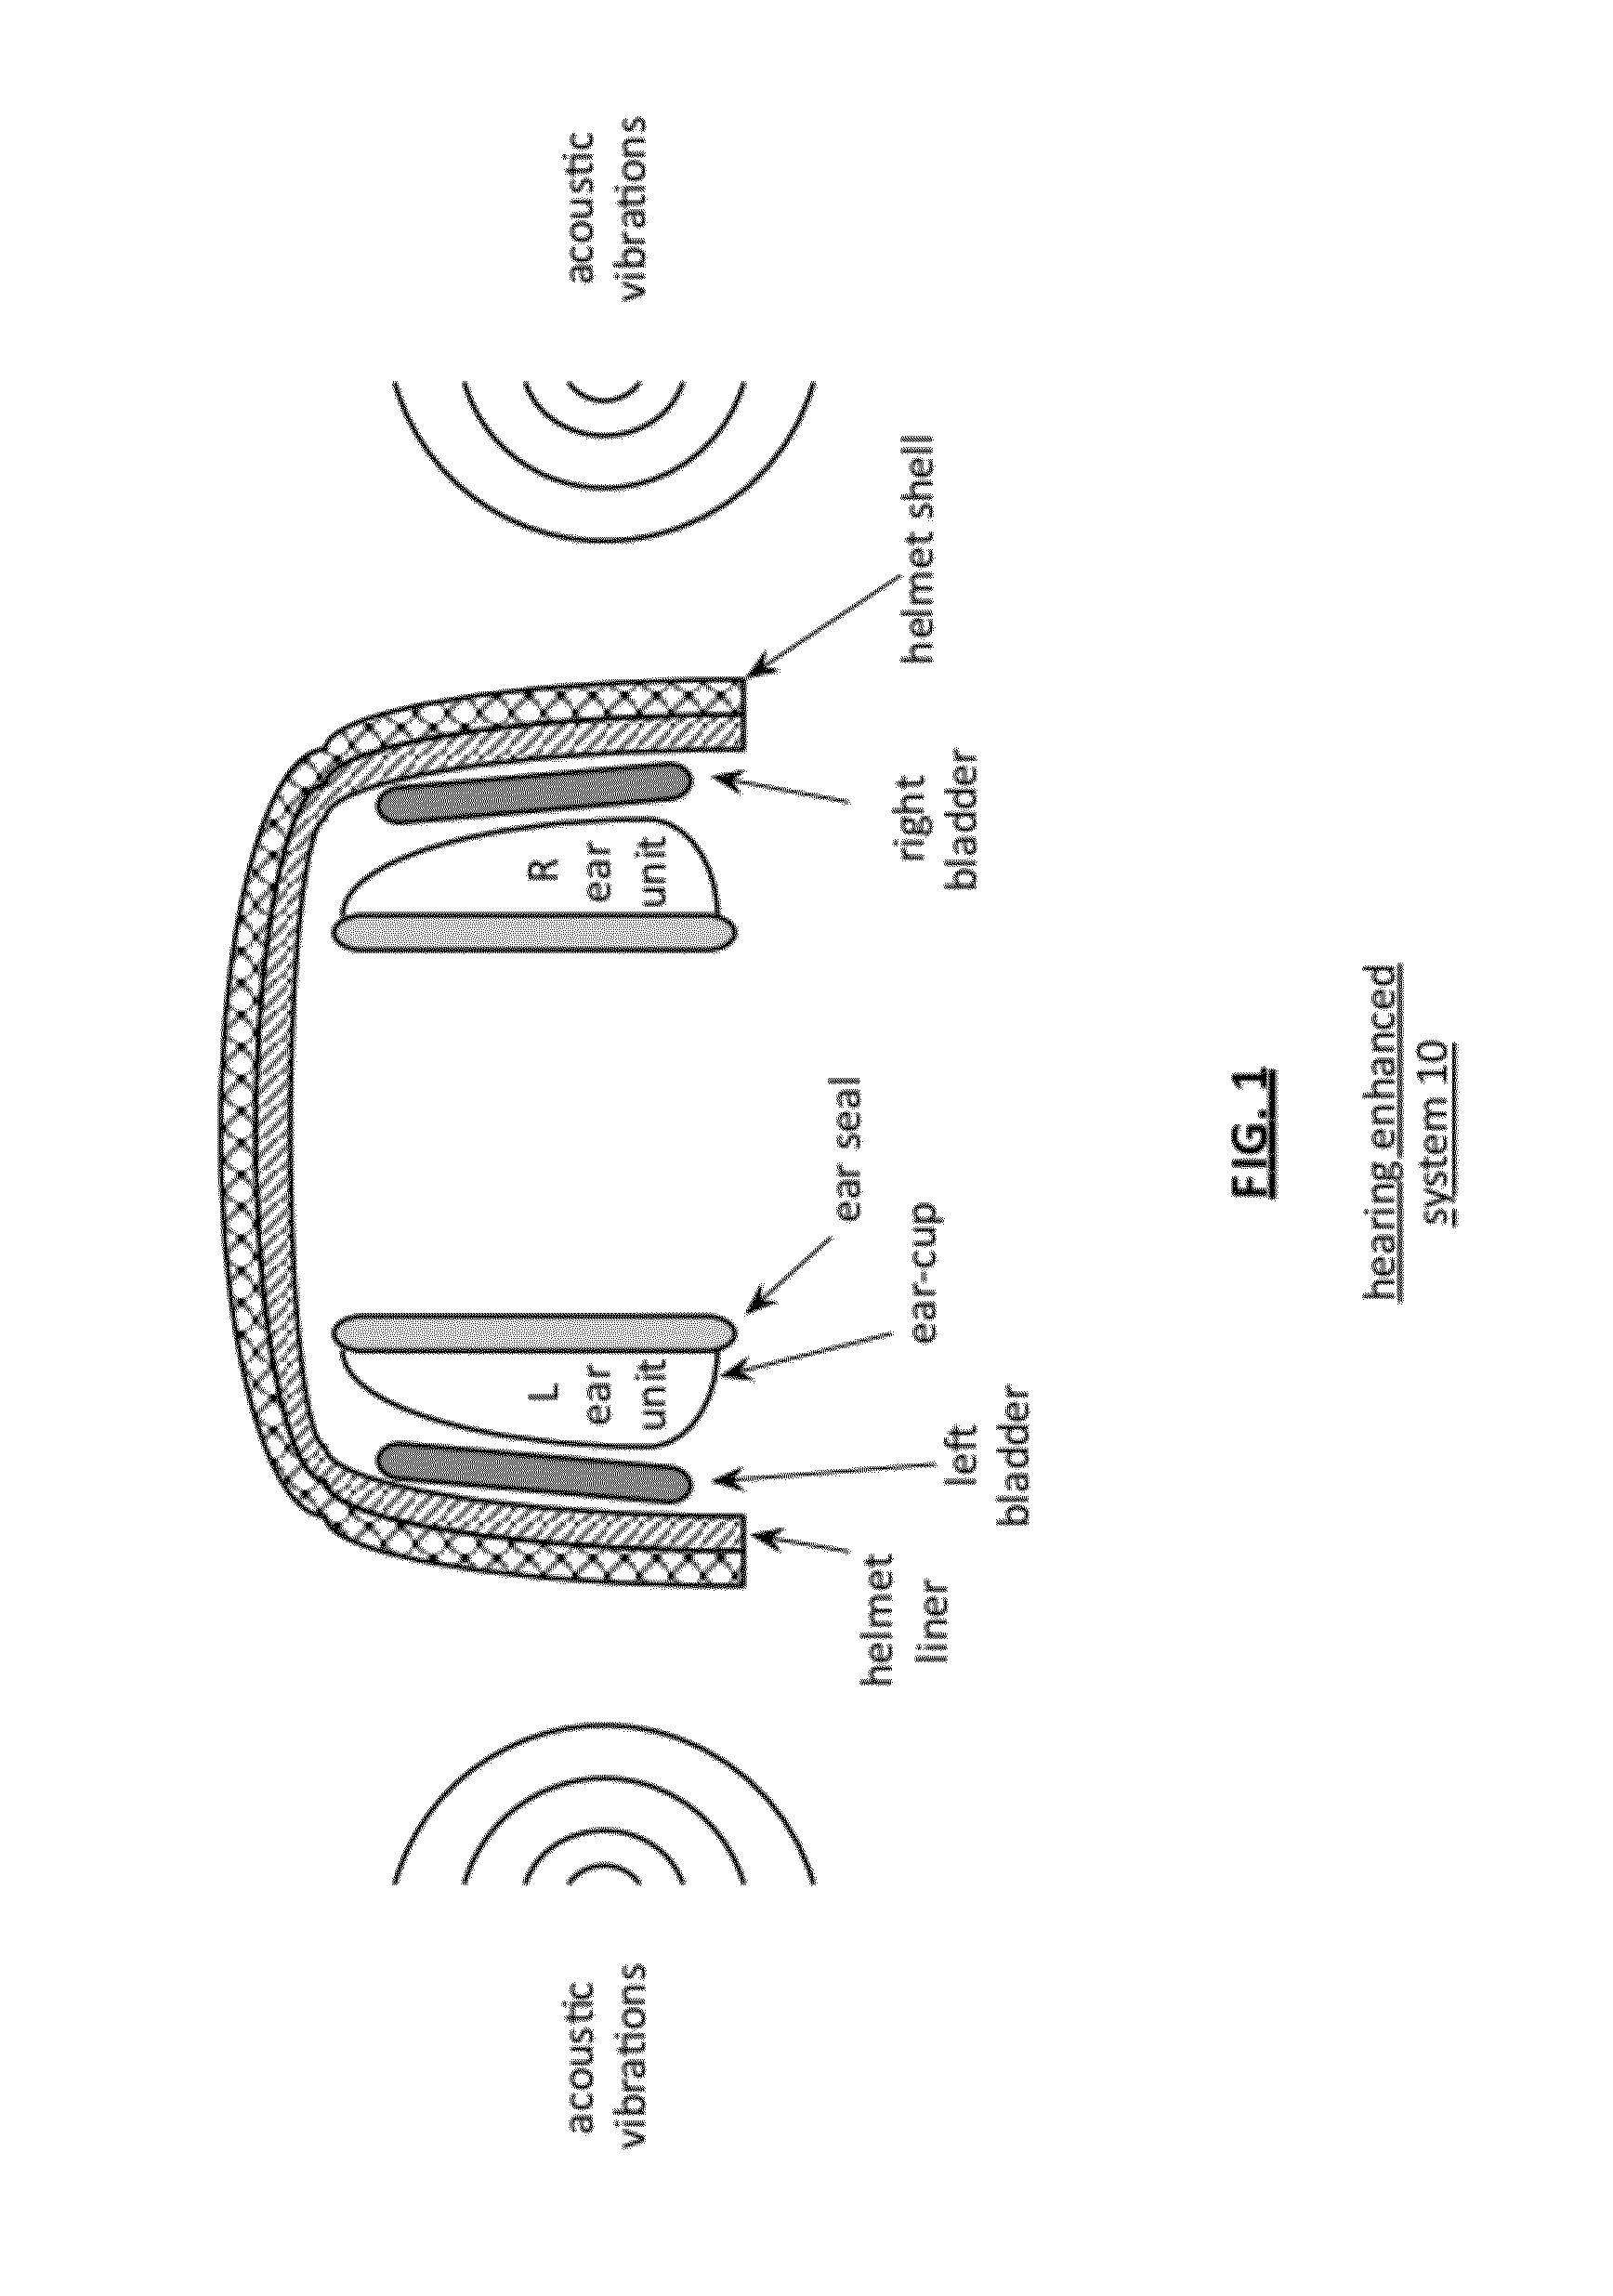 Hearing protection system for use within a helmet